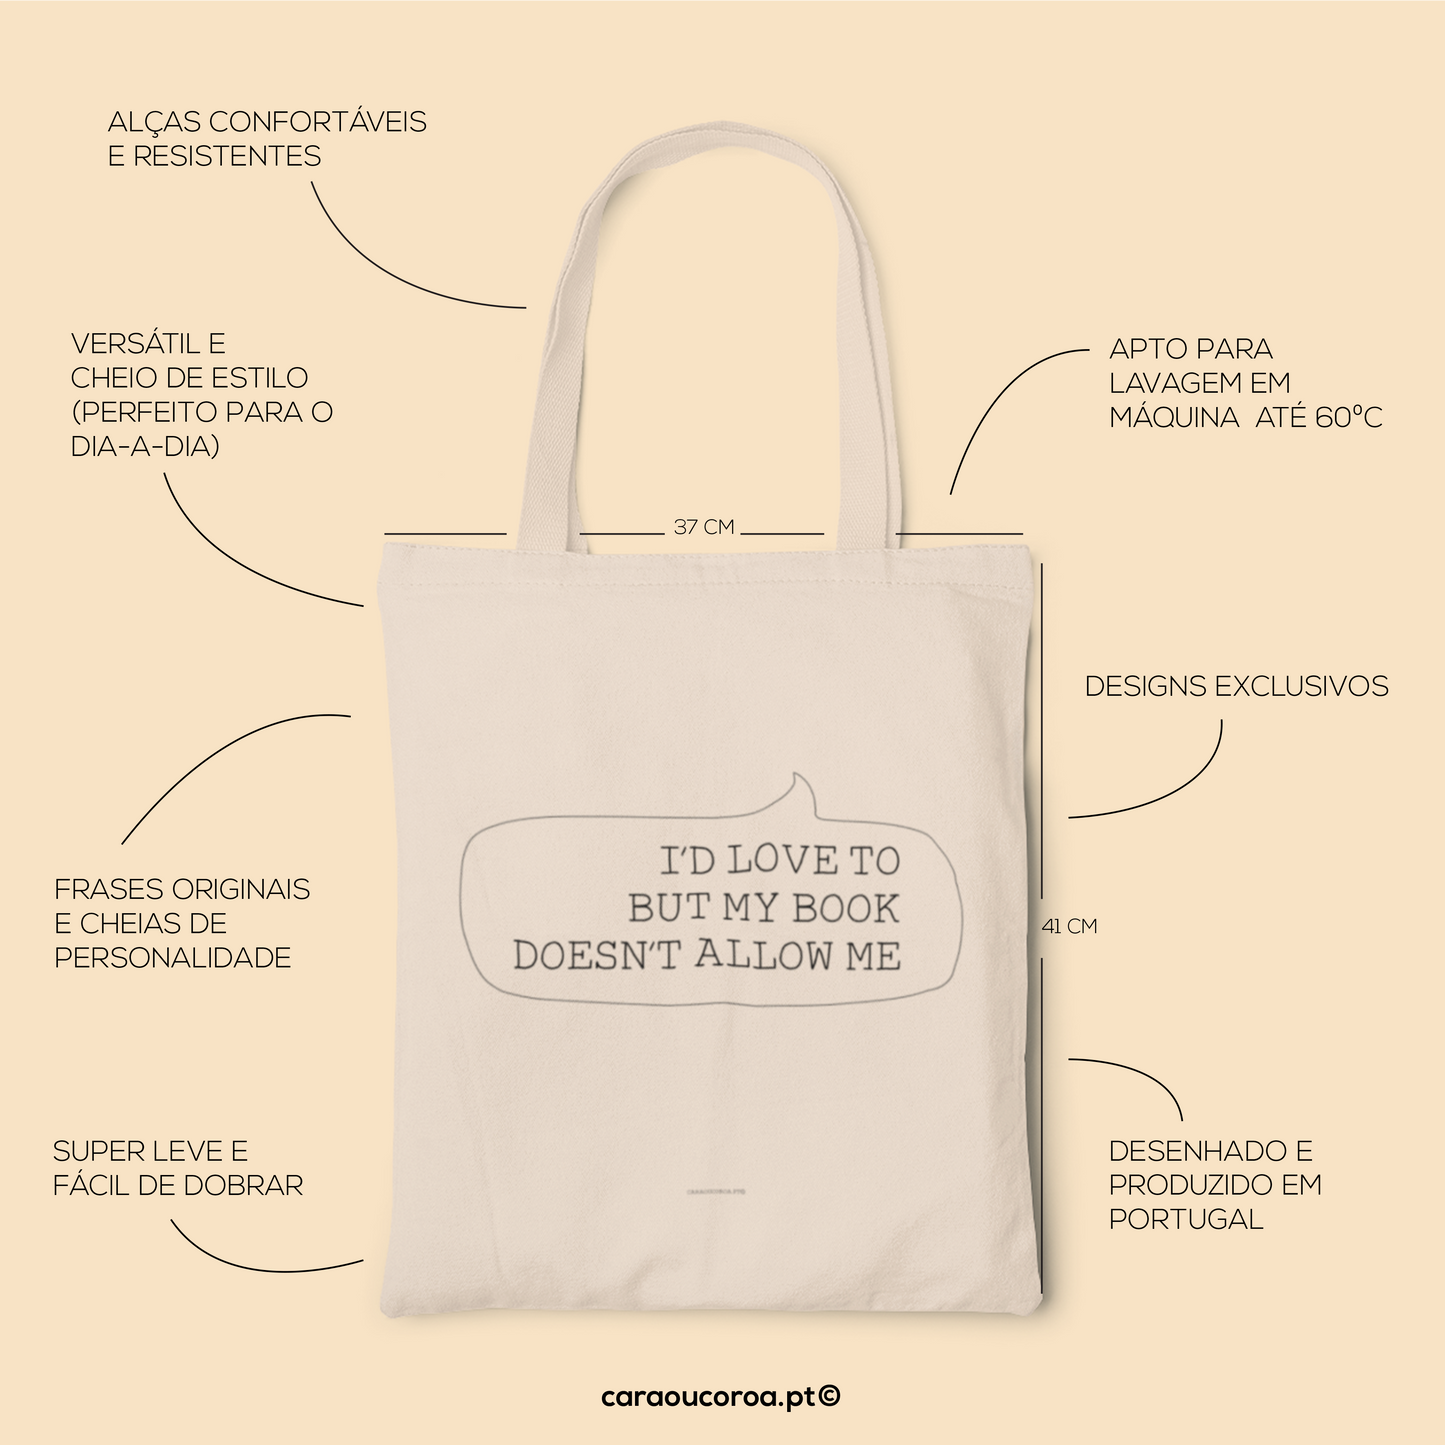 Tote Bag "My book doesn't allow"